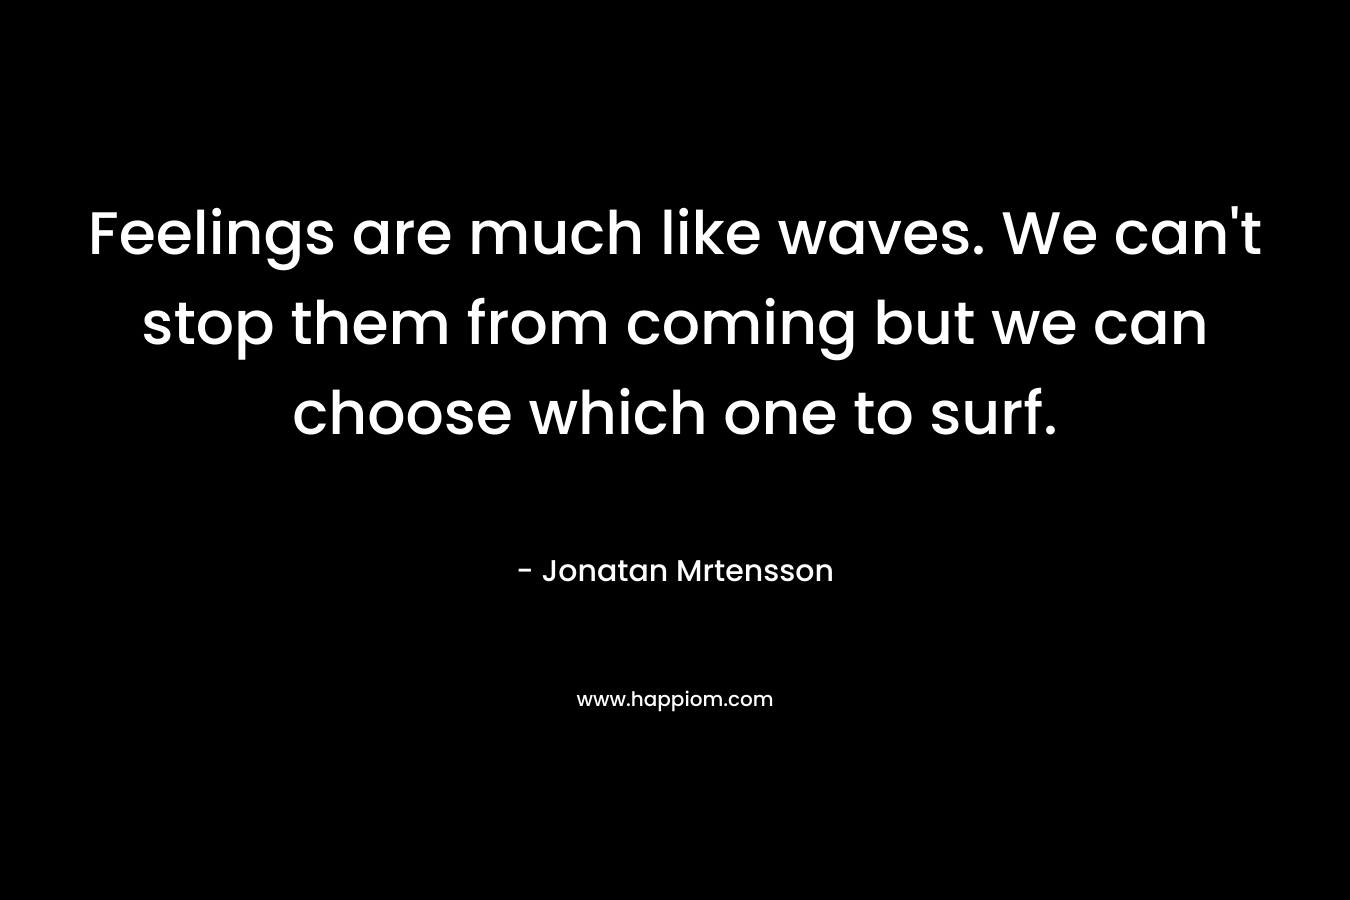 Feelings are much like waves. We can't stop them from coming but we can choose which one to surf.